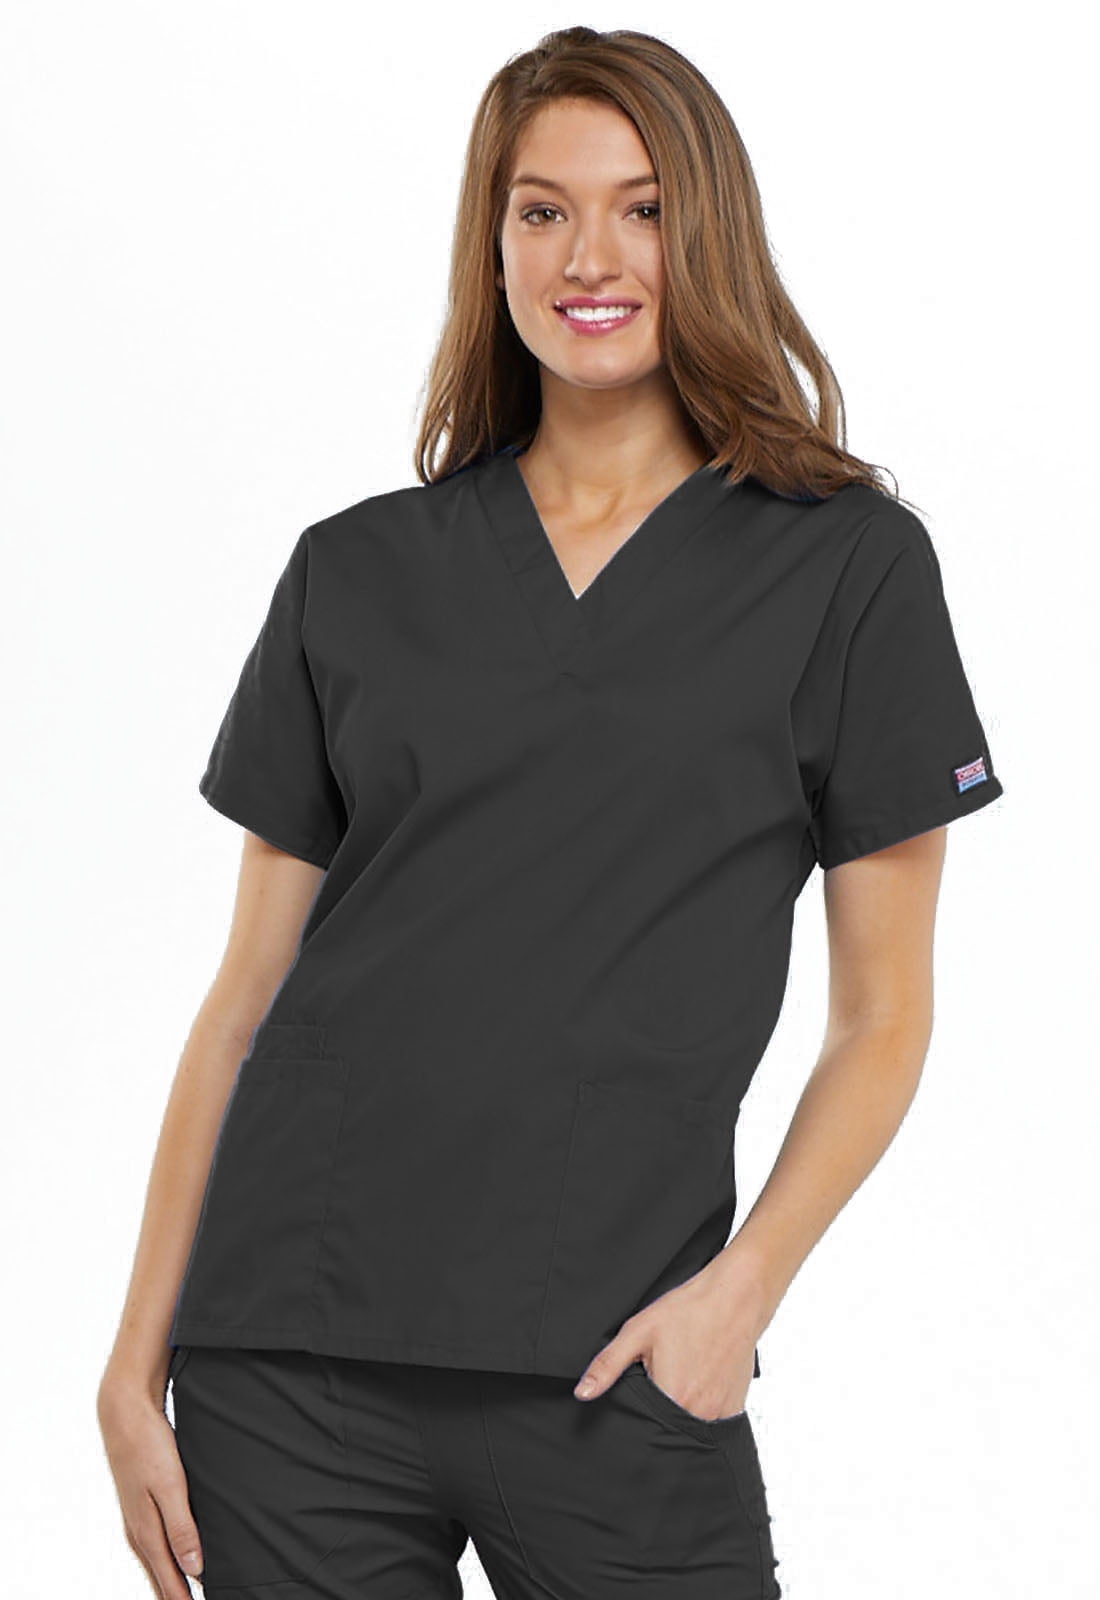 Details about   Sunnyvale Cherokee Scrubs Prints V Neck Top 4700 SVAL 